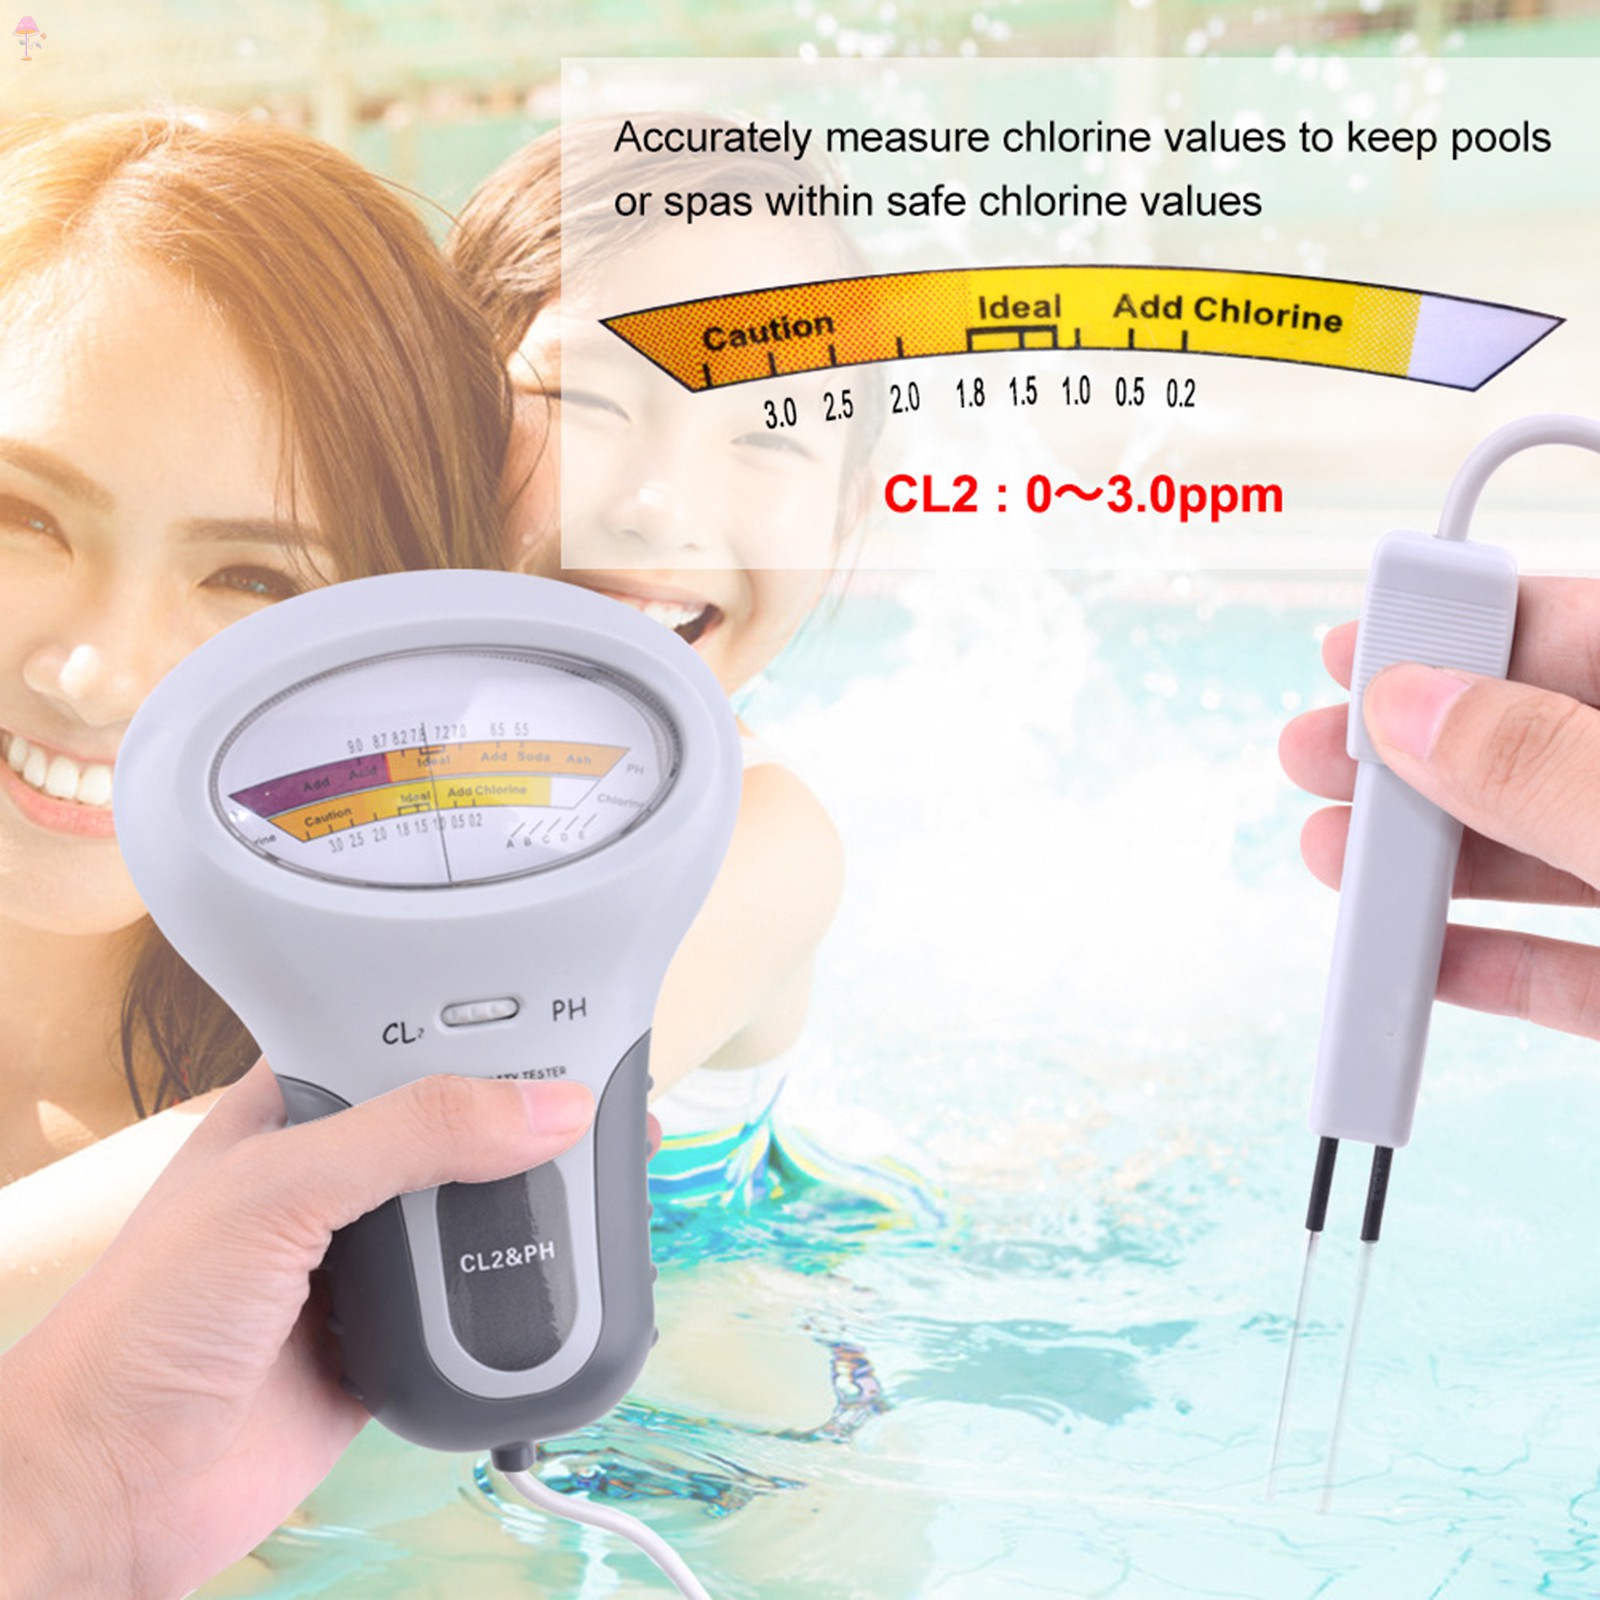 LL PH Meter & Chlorine Level CL2 Meter Combo Portable 2 in 1 Water Quality Dial Tester for Pool Spa Drinking Water .VN